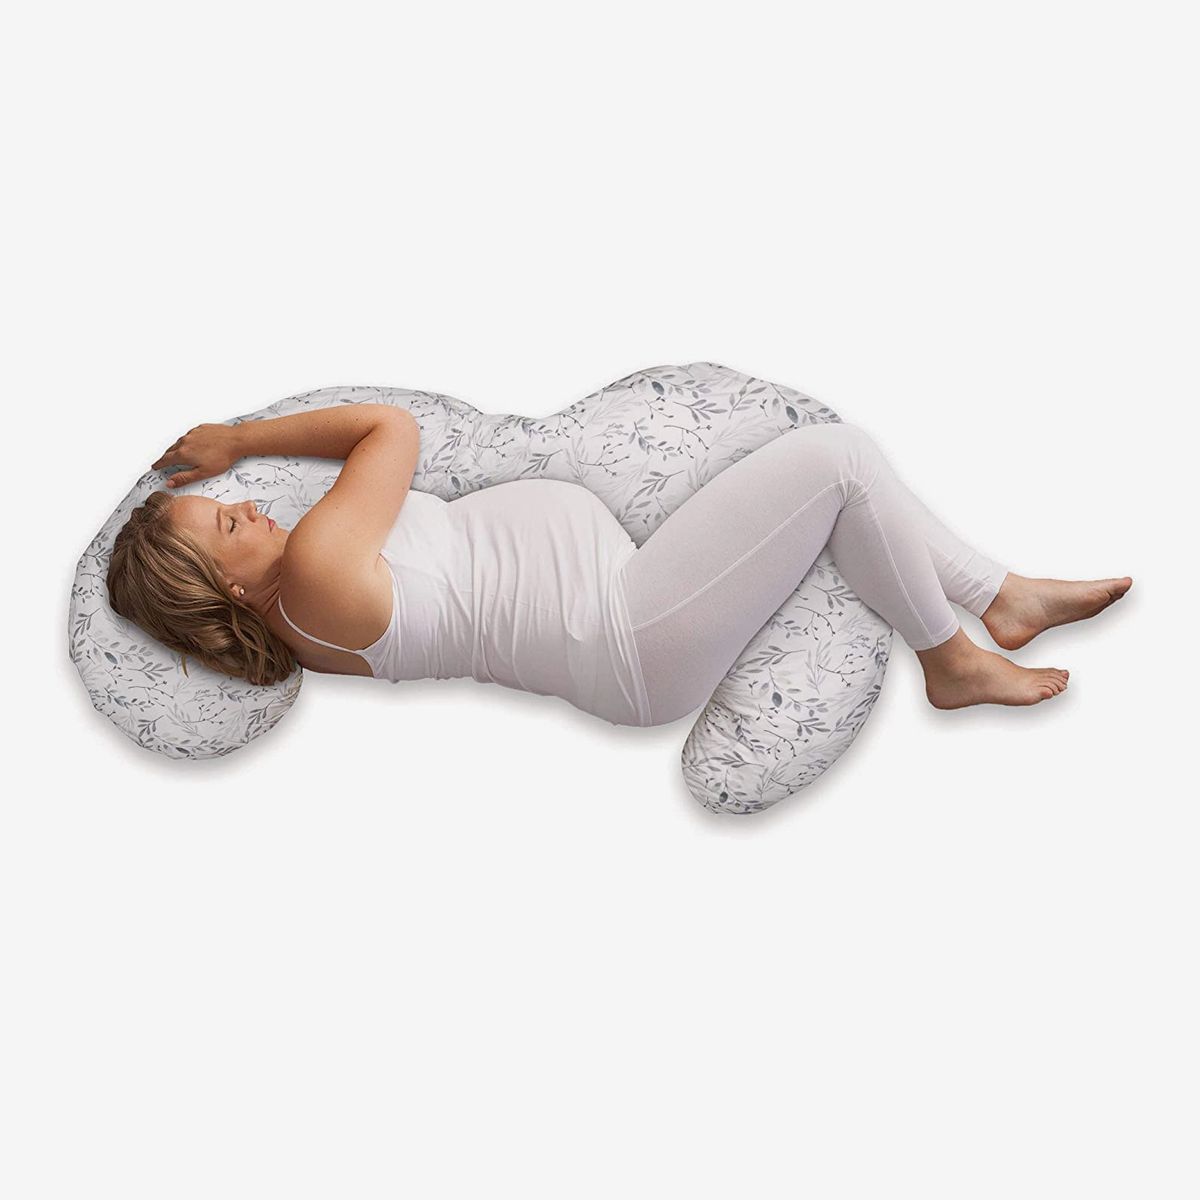 ForFlower Pregnancy Pillow U Shaped,Full Body Pillow with Washable Velet Cover,Maternity Pillow for Head Shoulder Back Belly Legs for Pregnant Women Side Sleeping Blue 